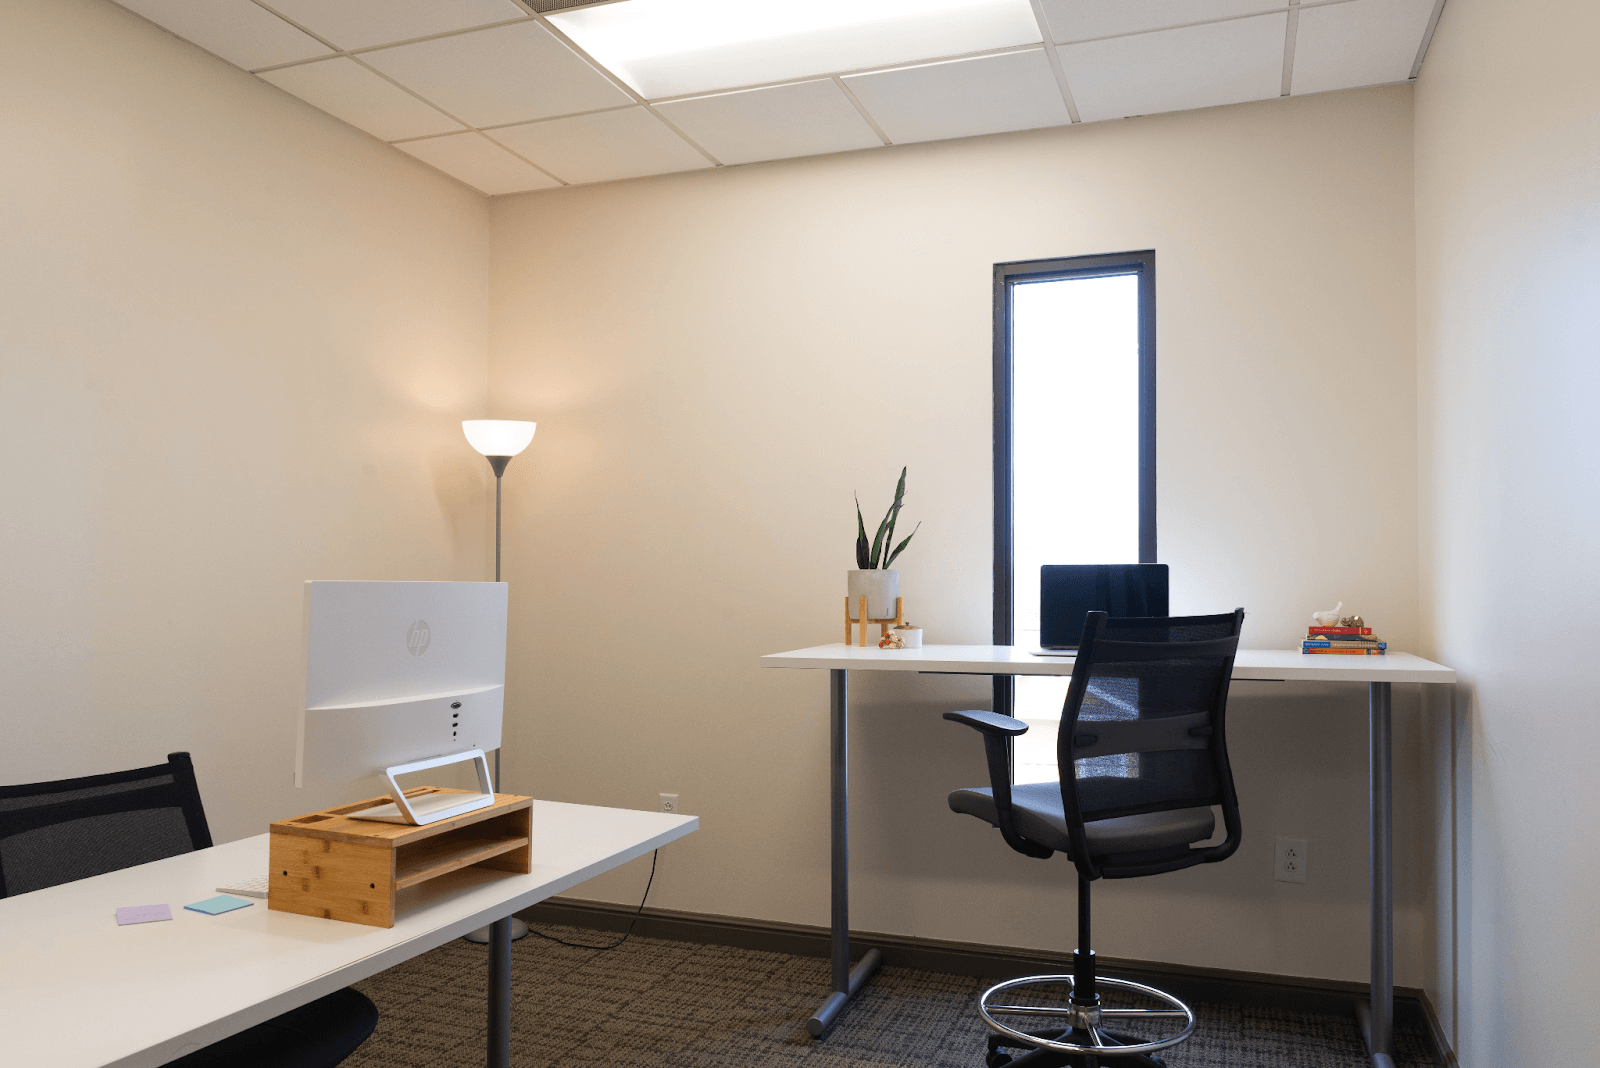 Small Offices Near Me for Rent: Where to Go - C615